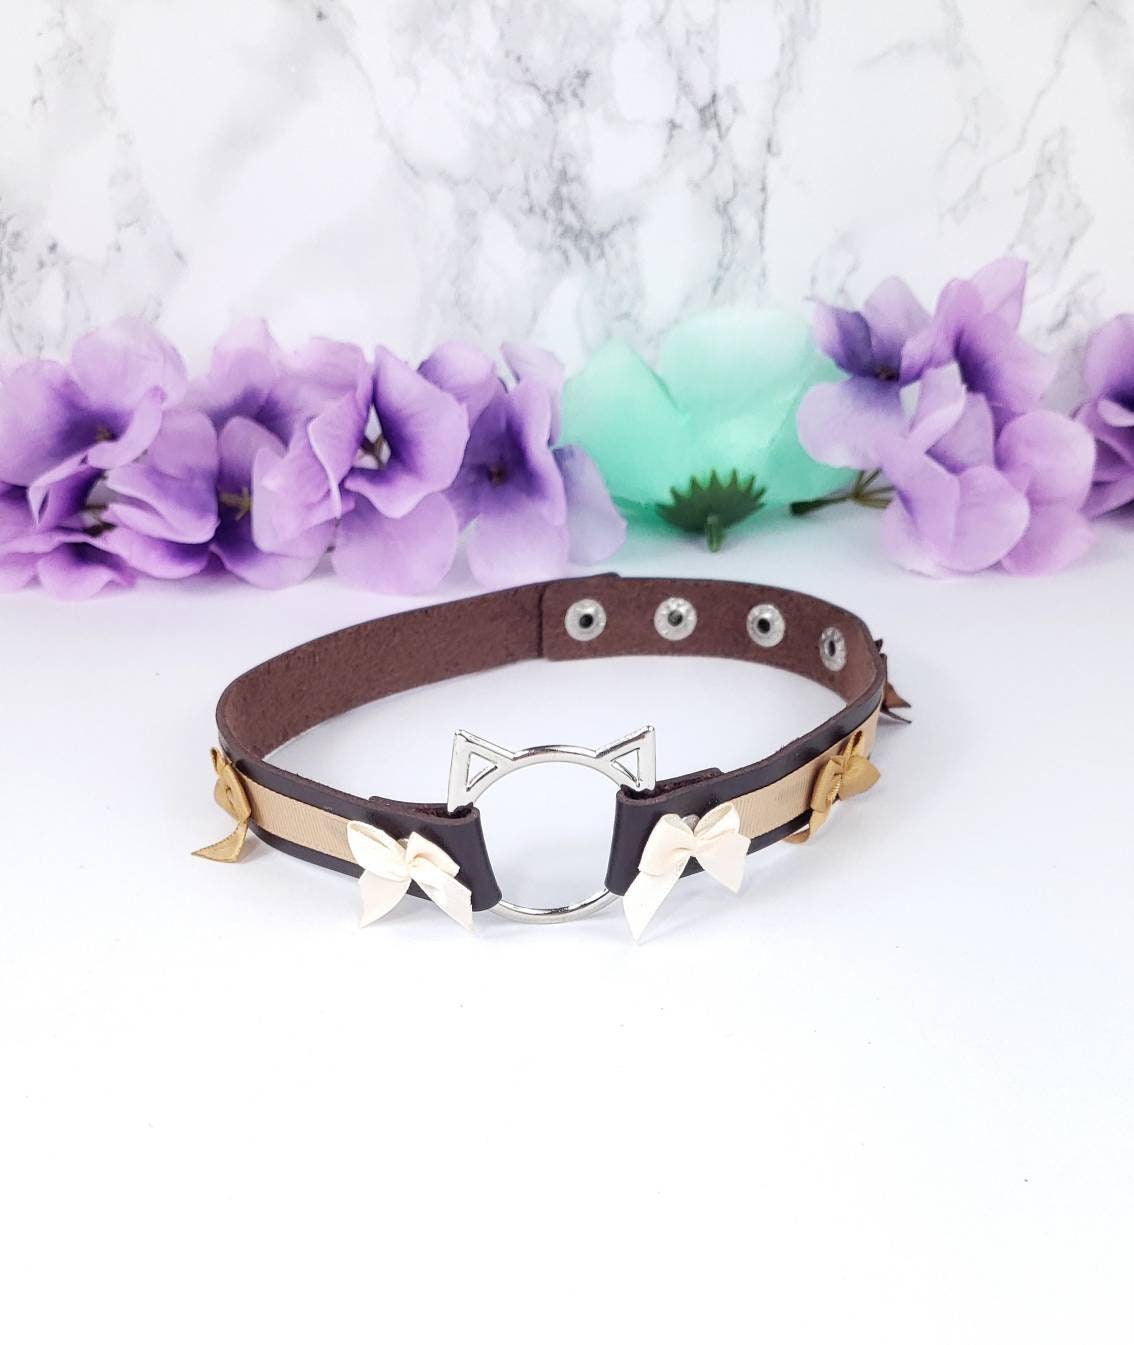 Brown Cat Choker with Bows, Adjustable Faux Leather Cat Collar